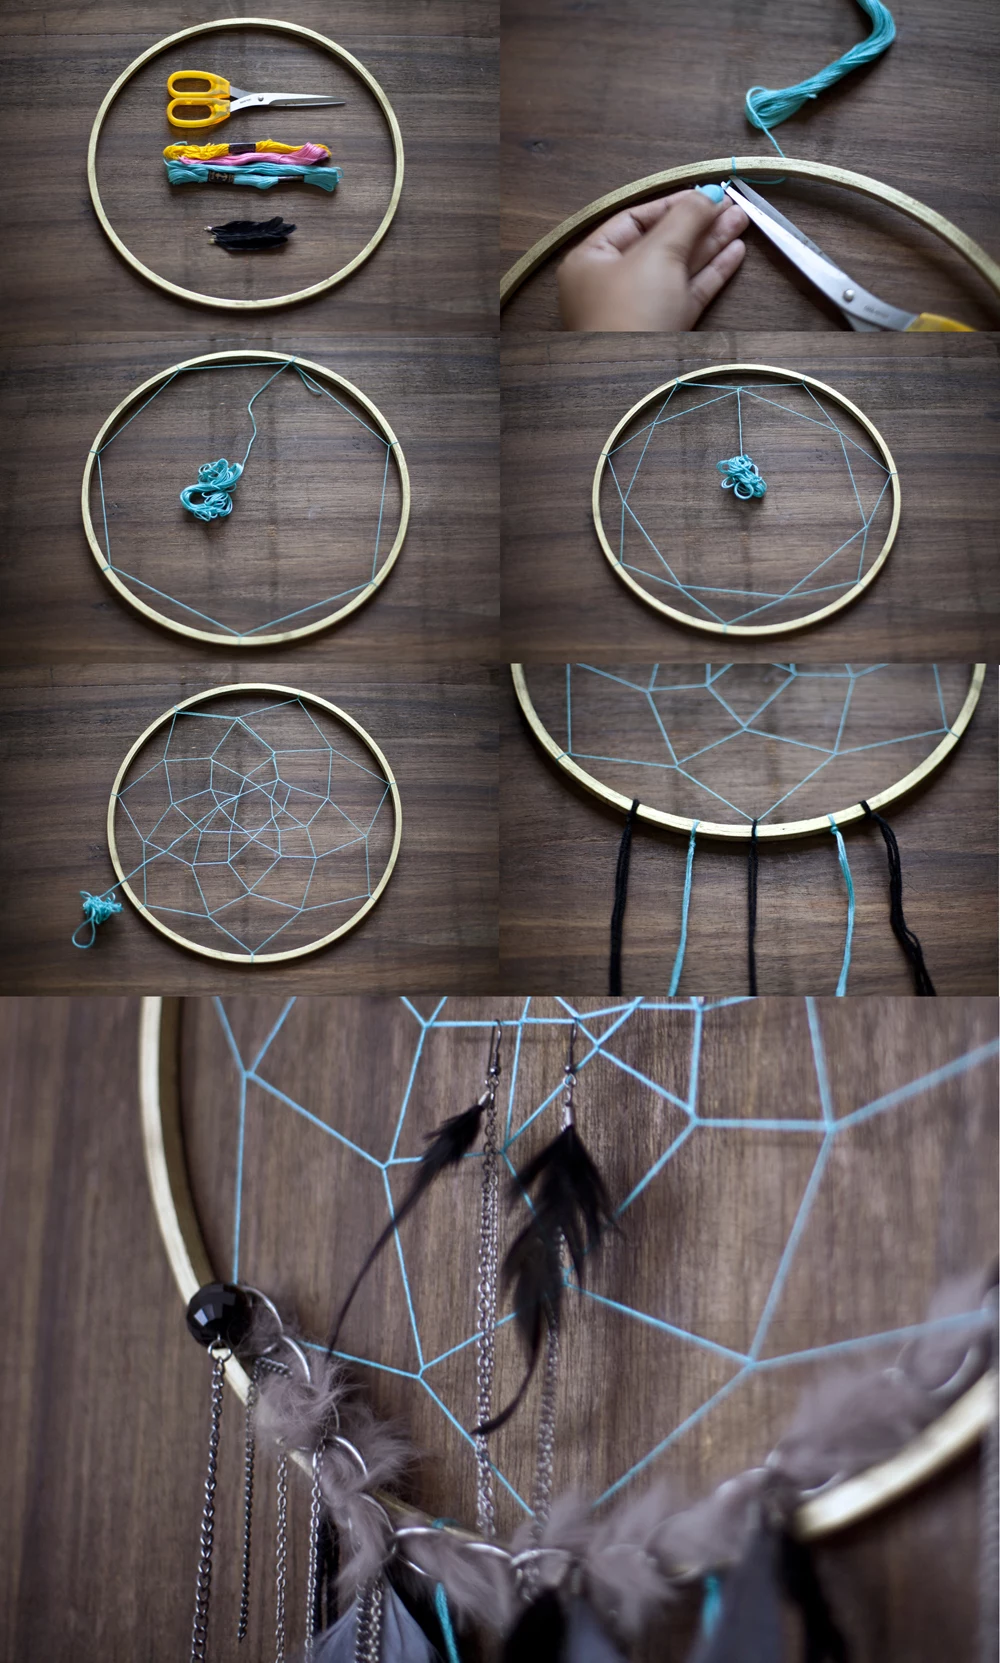 materials needed for making a dream catcher, scissors and thread in different colors, small wooden hoop and feathers, art and craft ideas, photos showing how to make a dream catcher